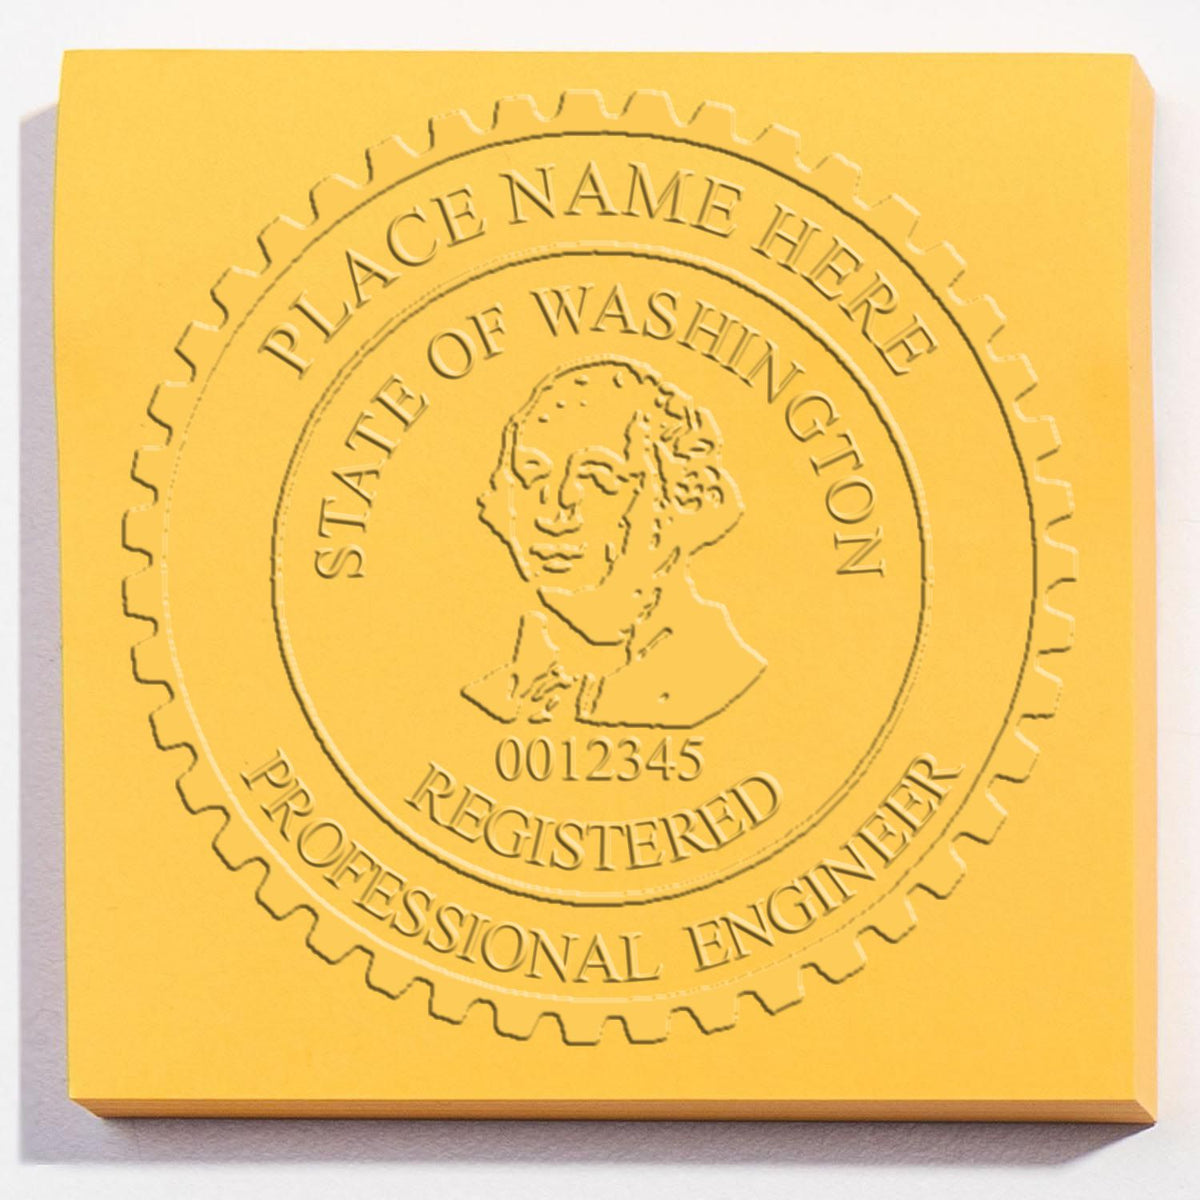 An in use photo of the Hybrid Washington Engineer Seal showing a sample imprint on a cardstock